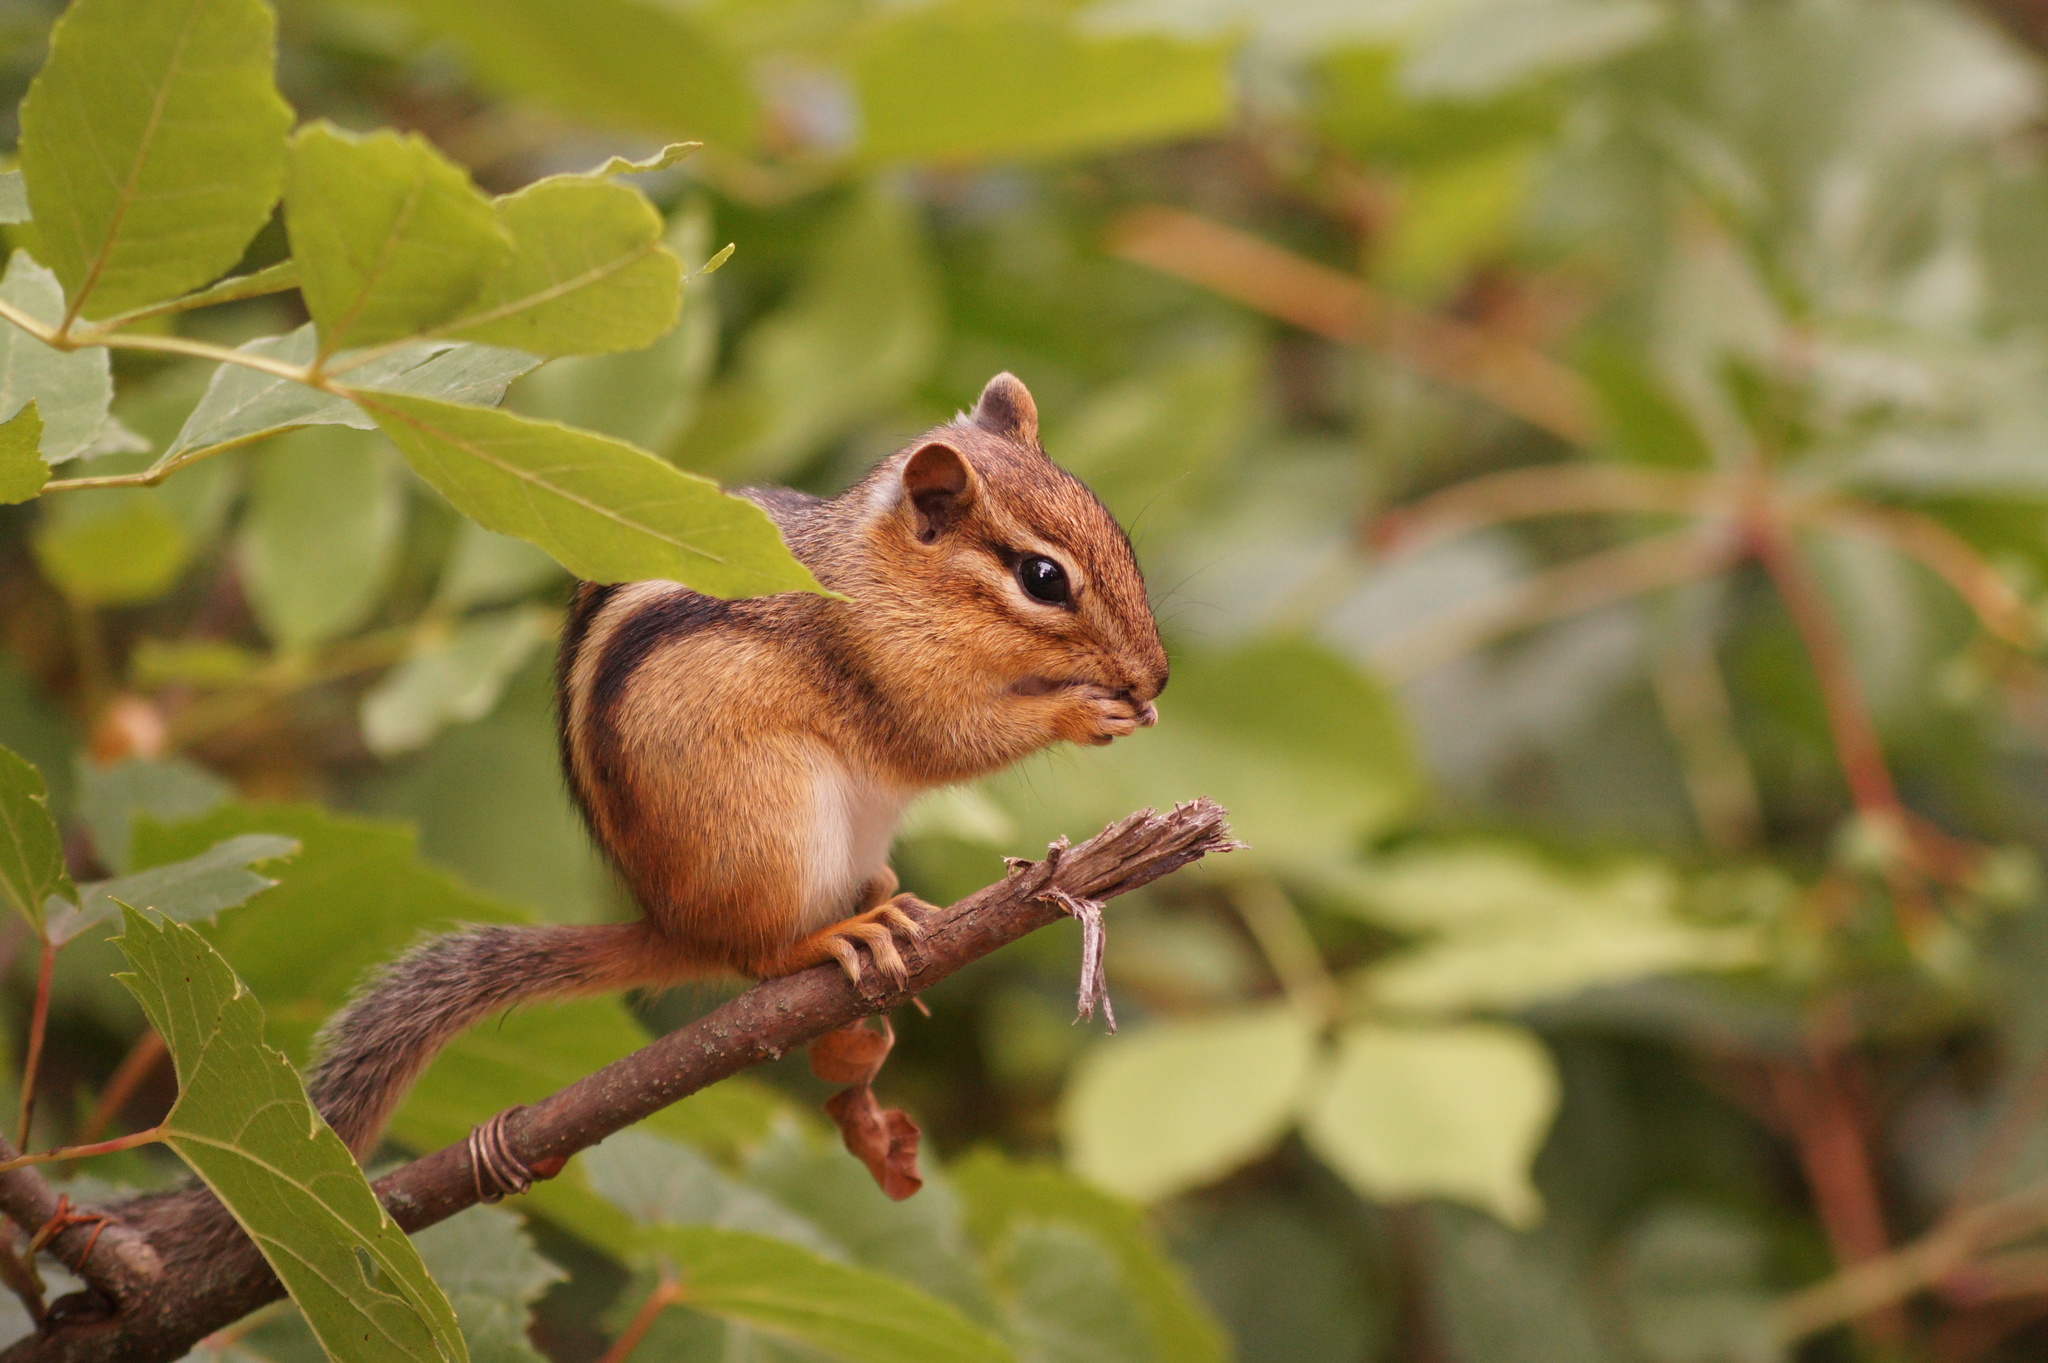 Eastern chipmunk perched on a twig, its forepaws are near its mouth. Its back is rounded and marked with high-contrast dark and white stripes. Its overall color is a warm brown.